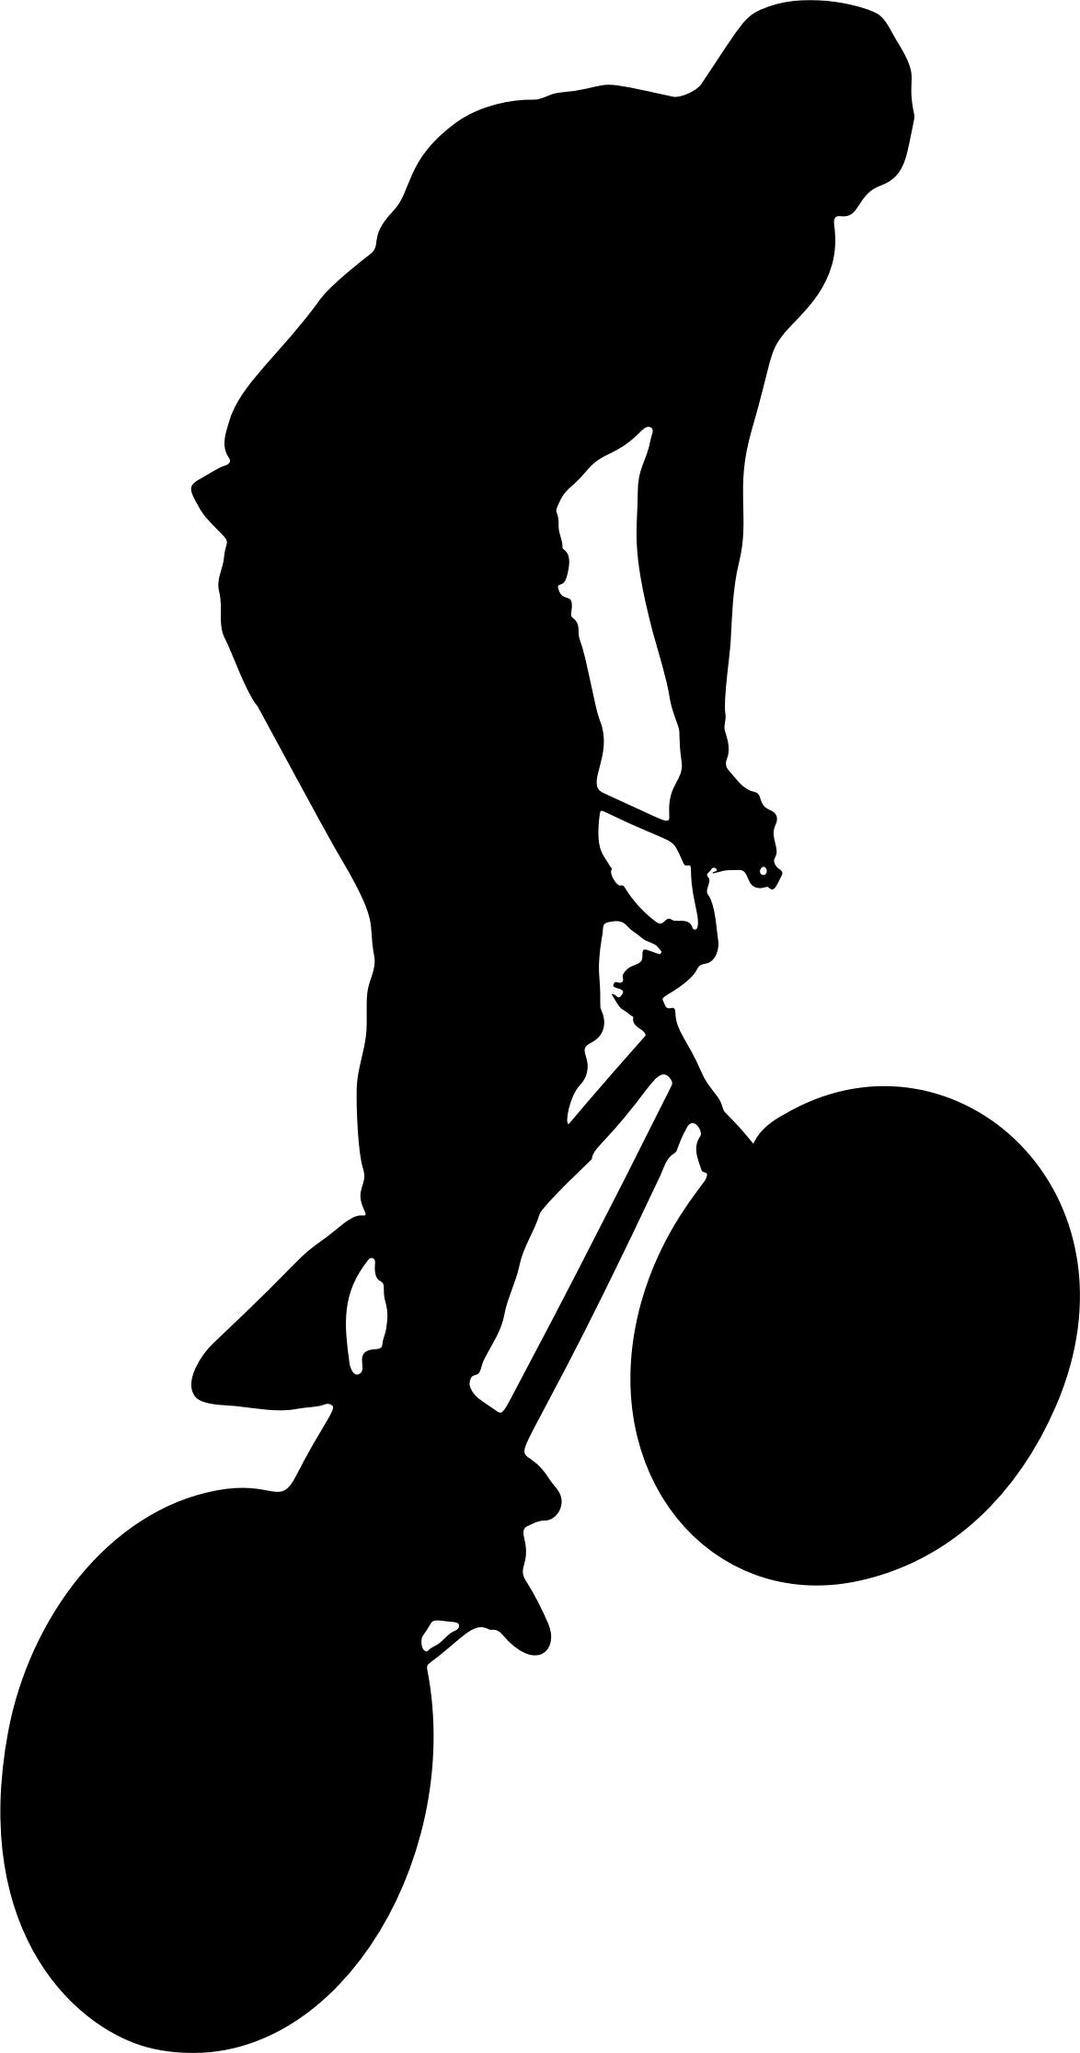 Bicycle Trick Silhouette png transparent